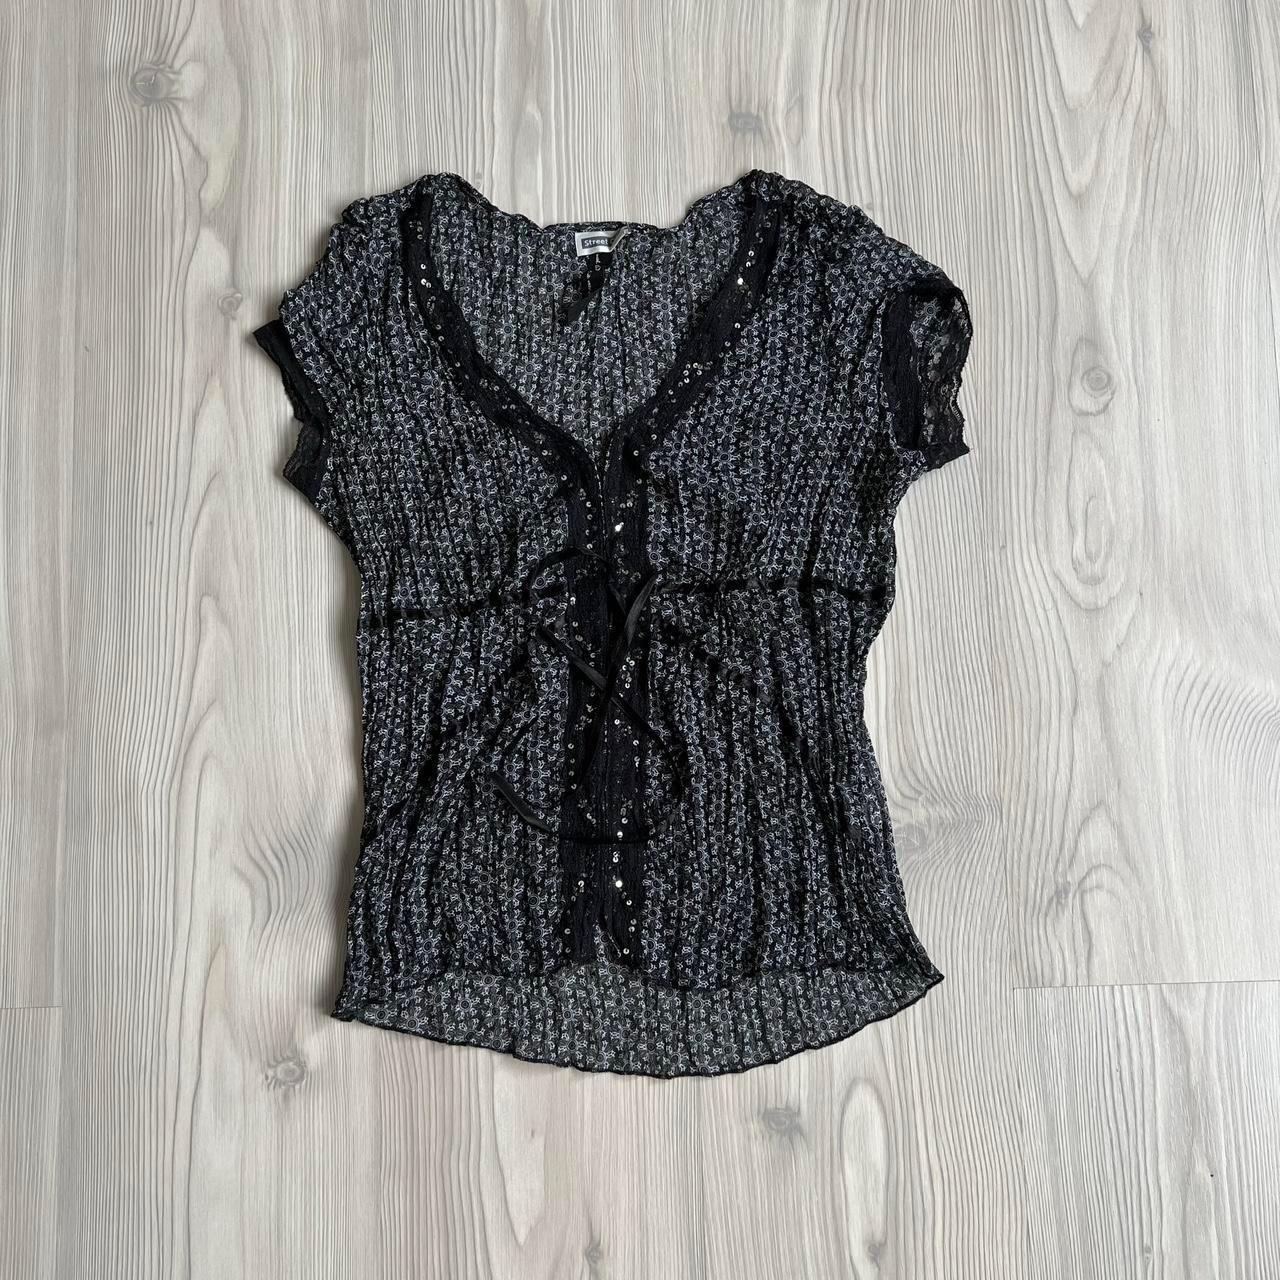 insane micro mesh sheer 2000s baby doll top with... - Depop